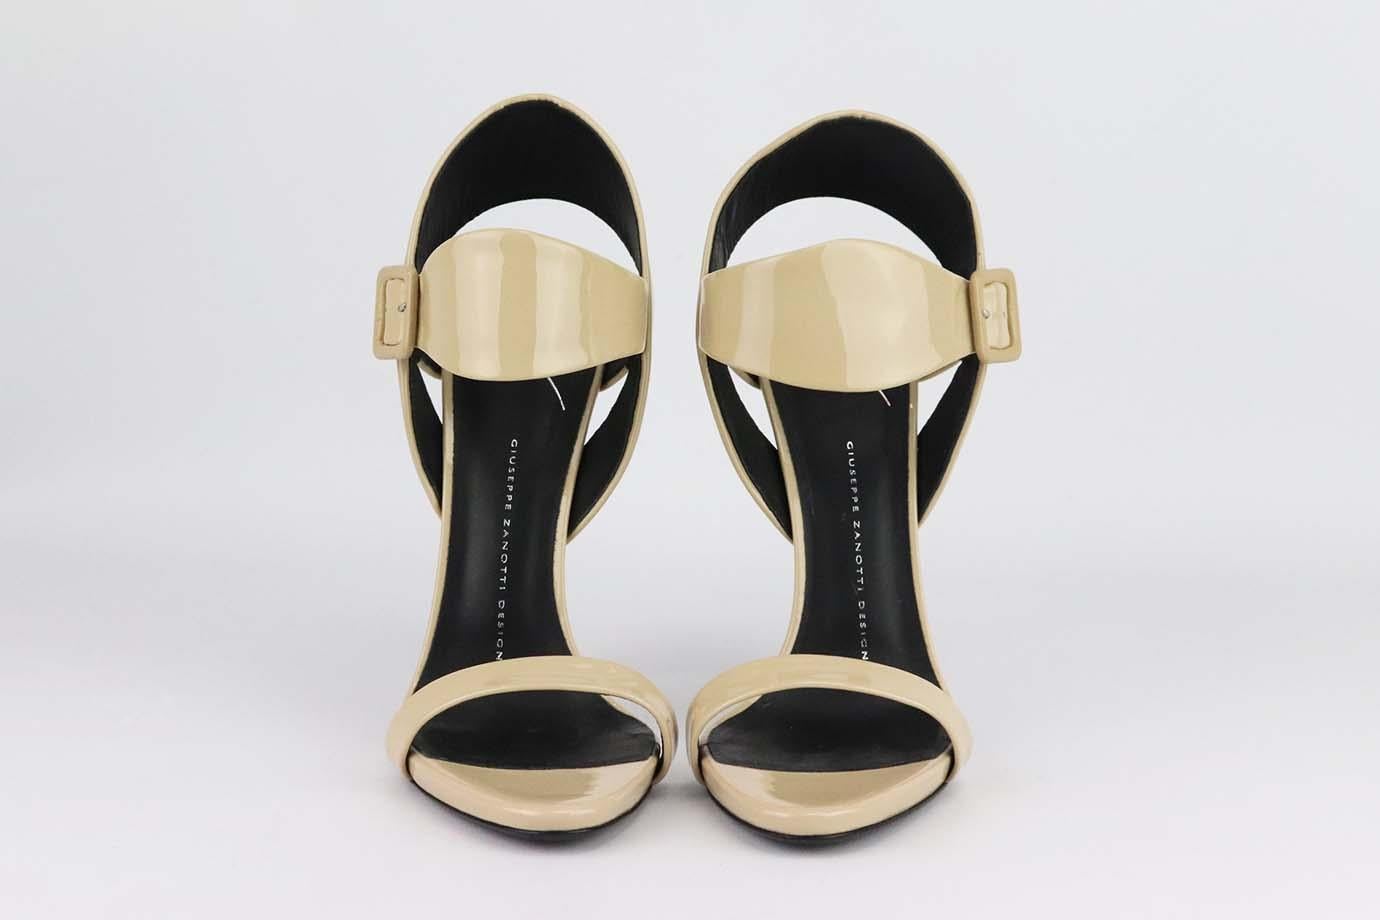 These sandals by Giuseppe Zanotti are sleek, classic and will work with virtually everything in your wardrobe, this beige glossy patent-leather pair has a graded heel and lightly cushioned insole. Heel measures approximately 101 mm/ 4 inches. Beige